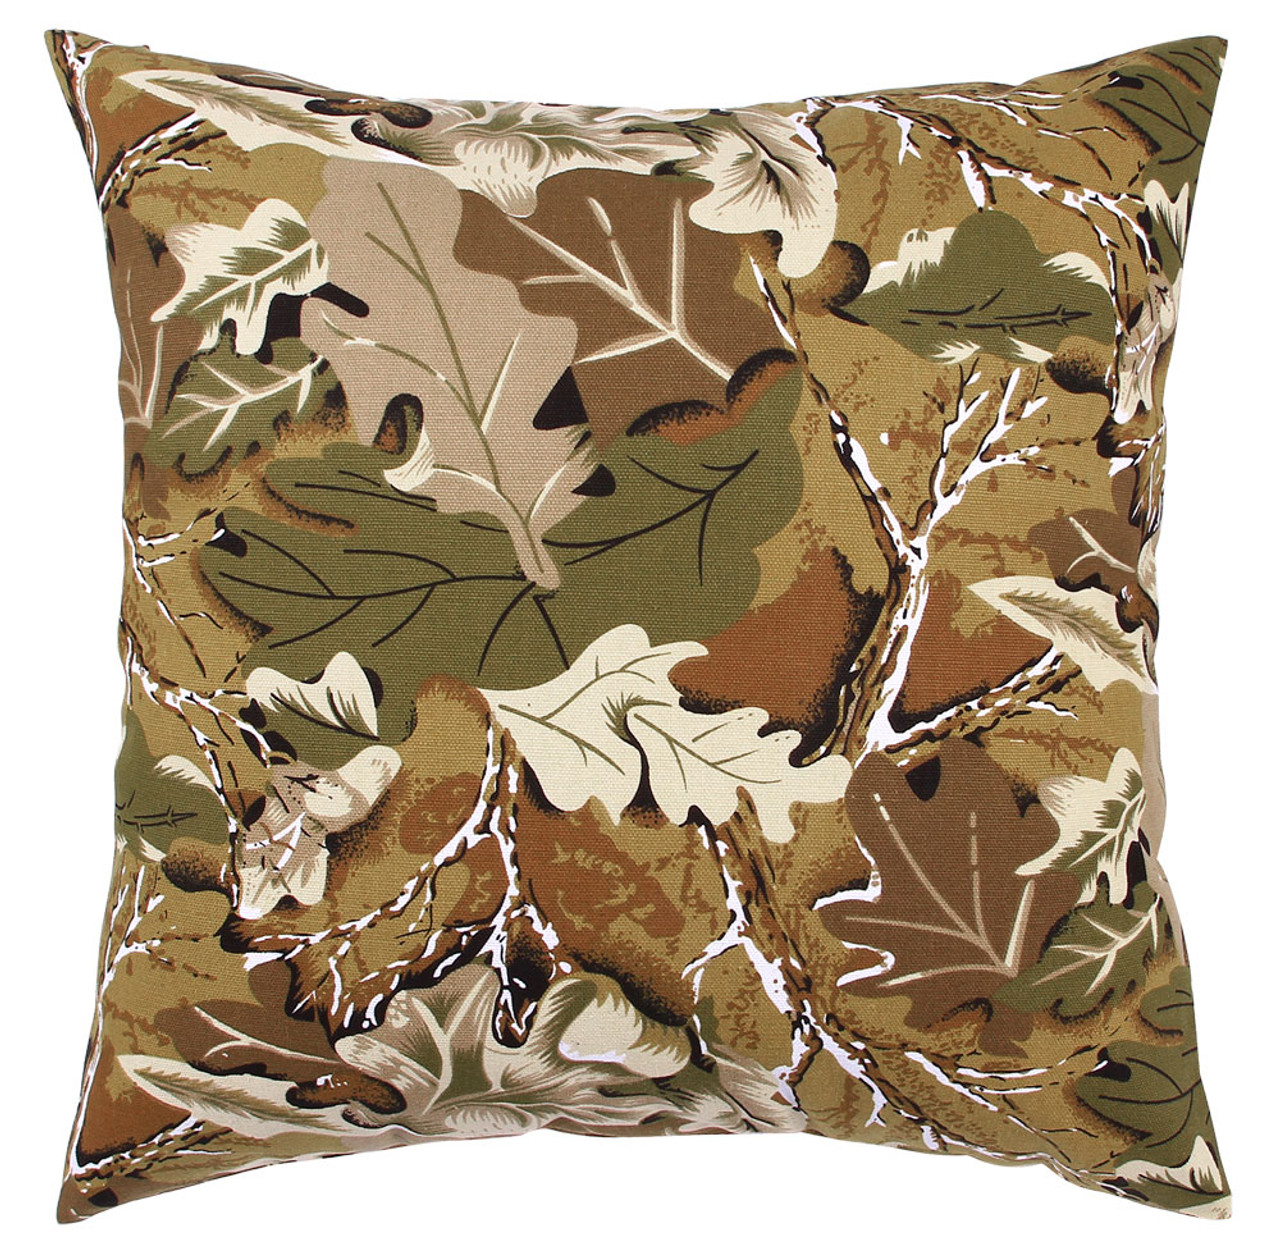 TangDepot® Camouflage Throw Pillow Cover, Camo Pillow Cases - 100% Cotton Canvas, Handmade - Many Colors & Sizes Avaliable